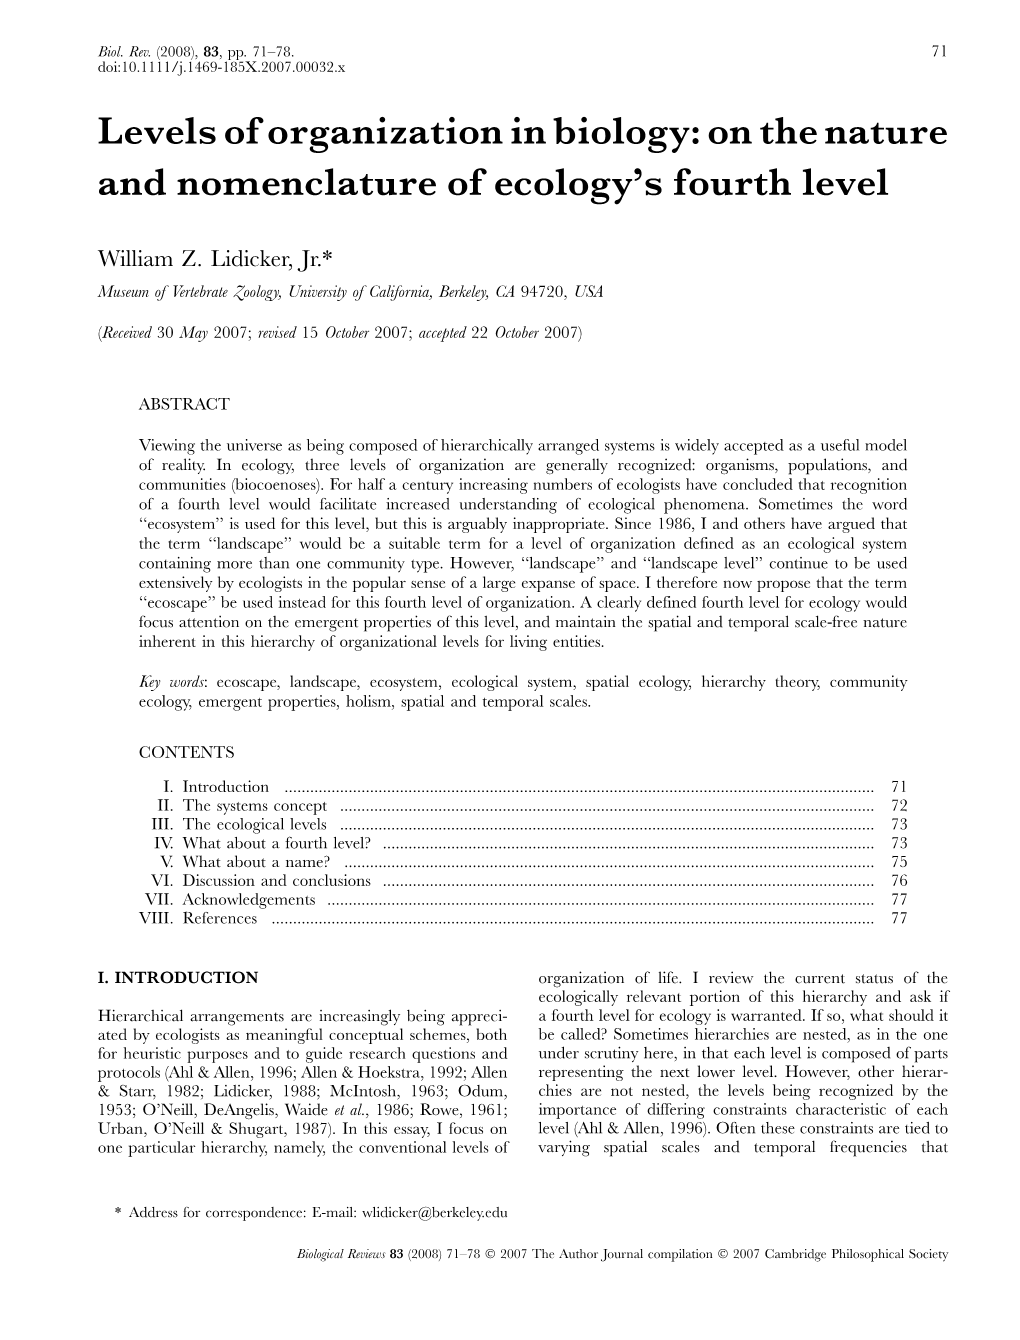 On the Nature and Nomenclature of Ecology's Fourth Level